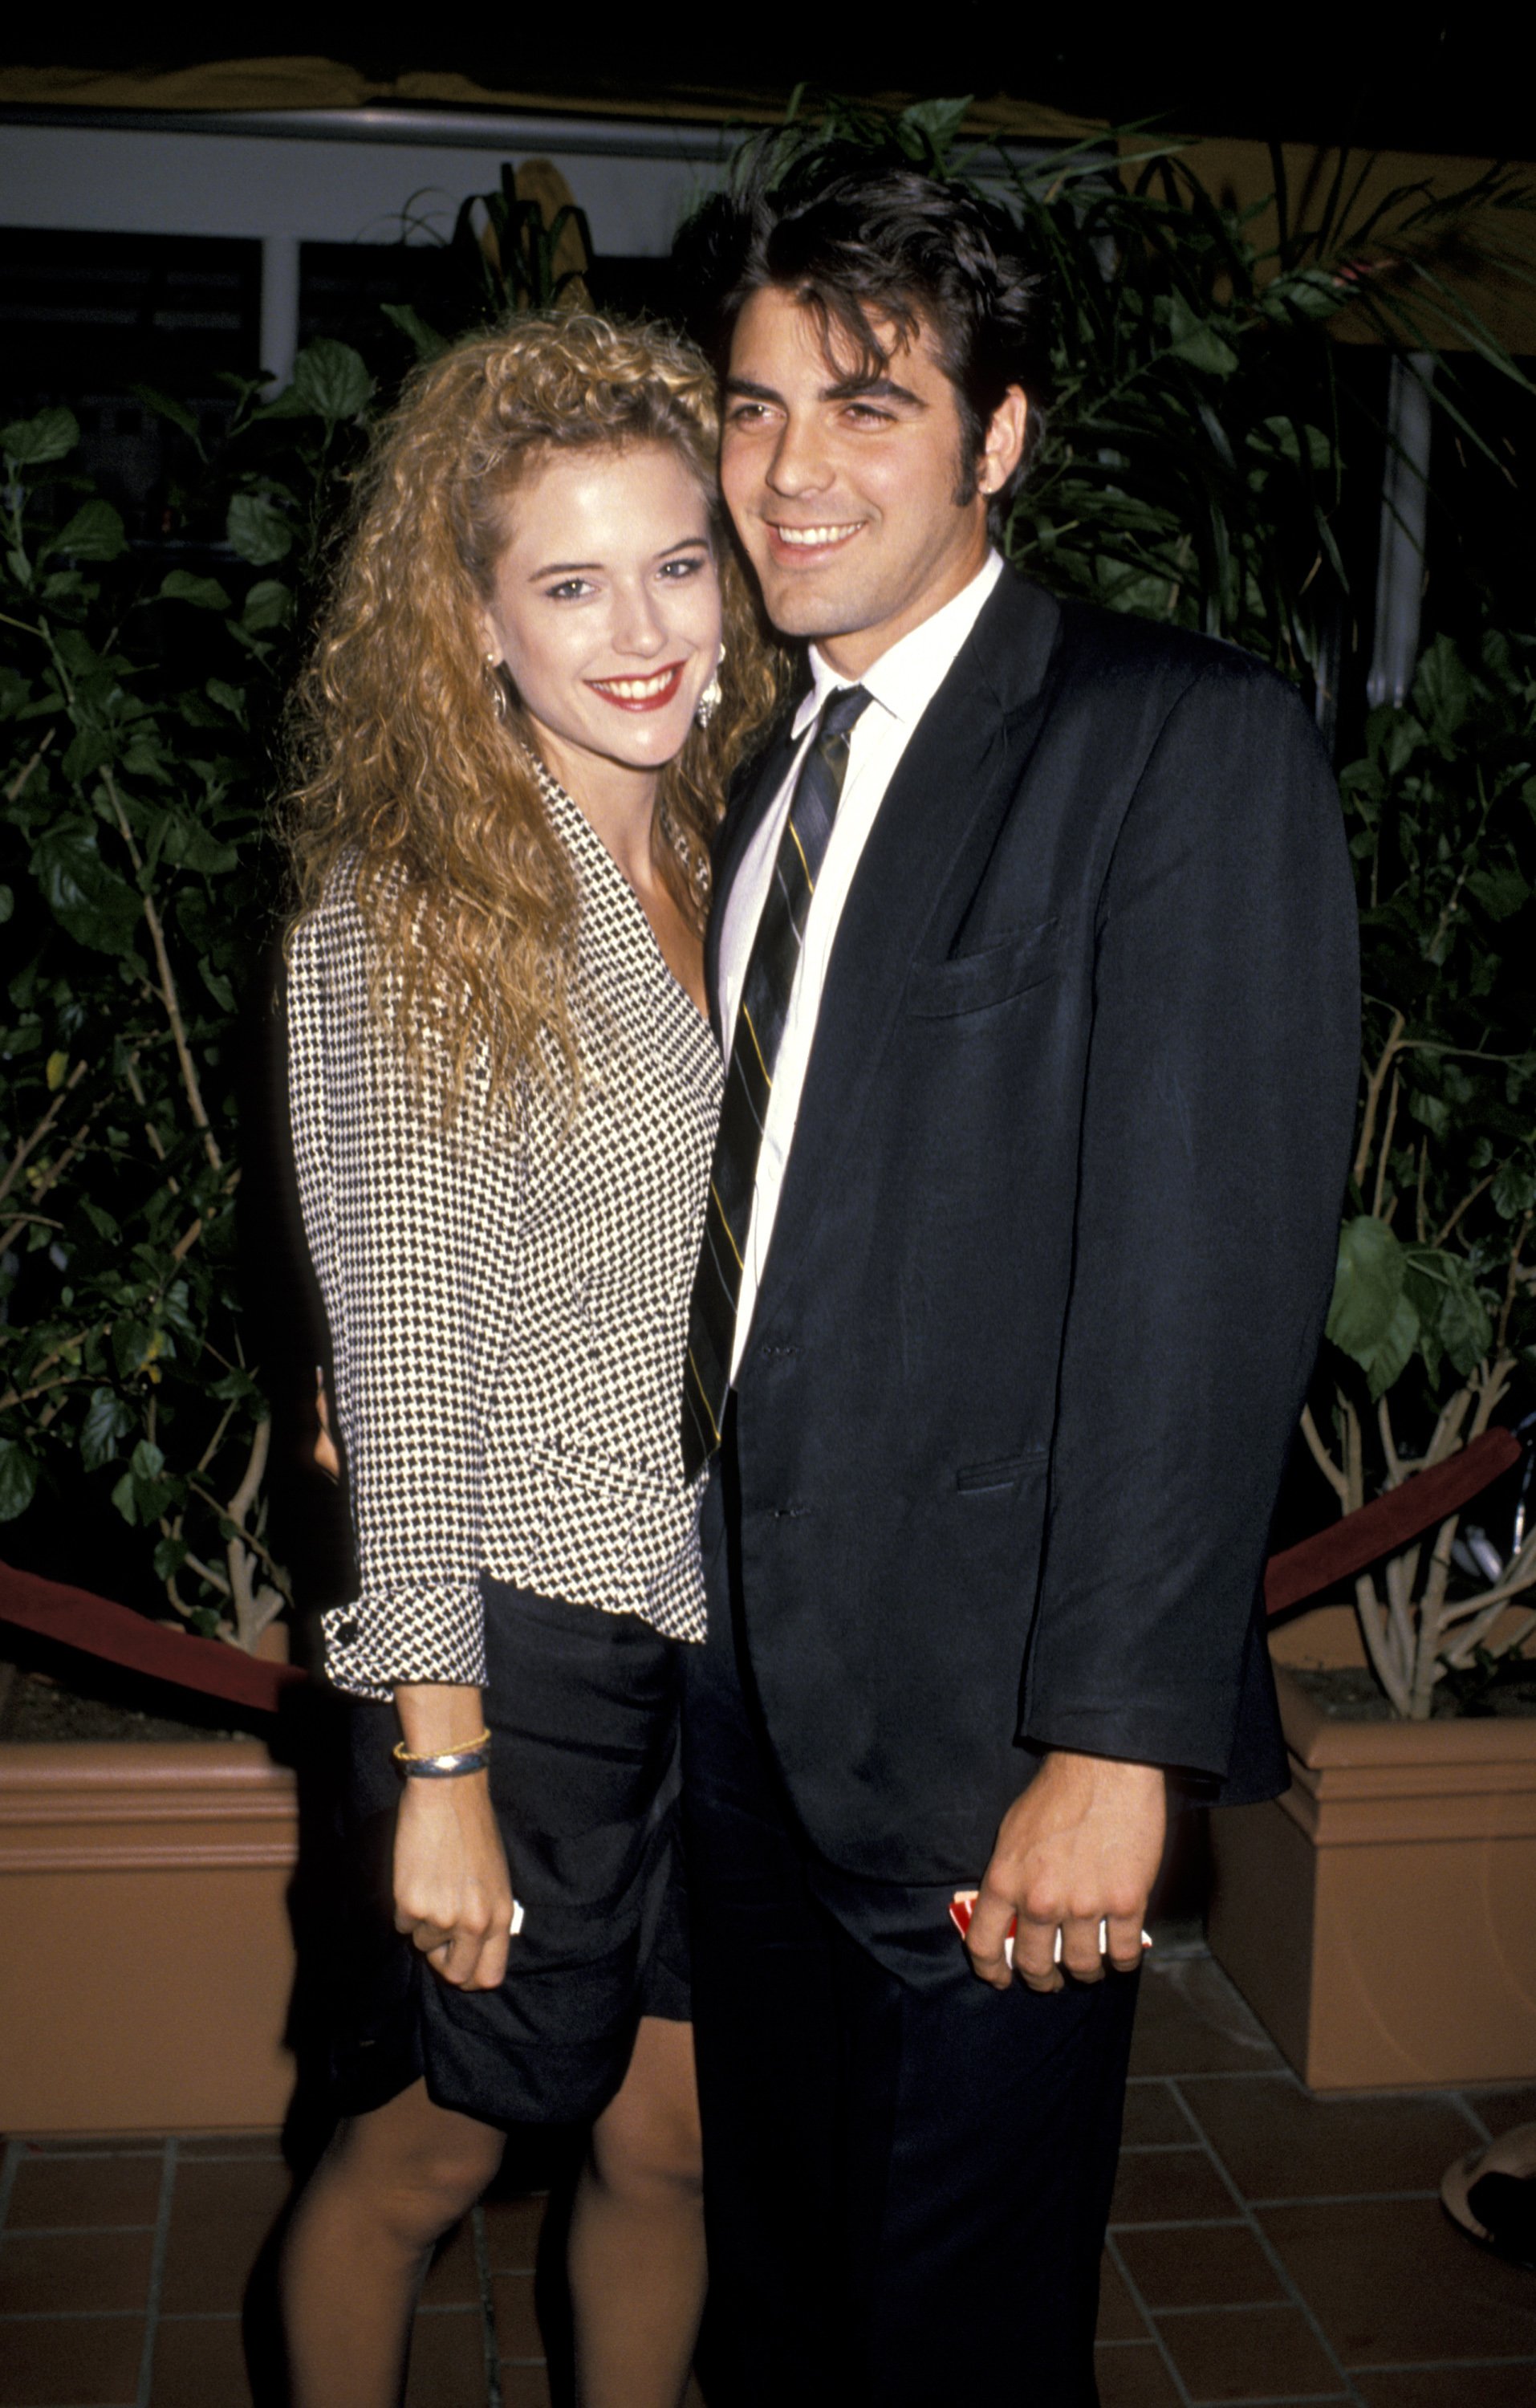 Actress Kelly Preston with her boyfriend filmmaker George Clooney at the premiere of "Twins." / Source: Getty Images